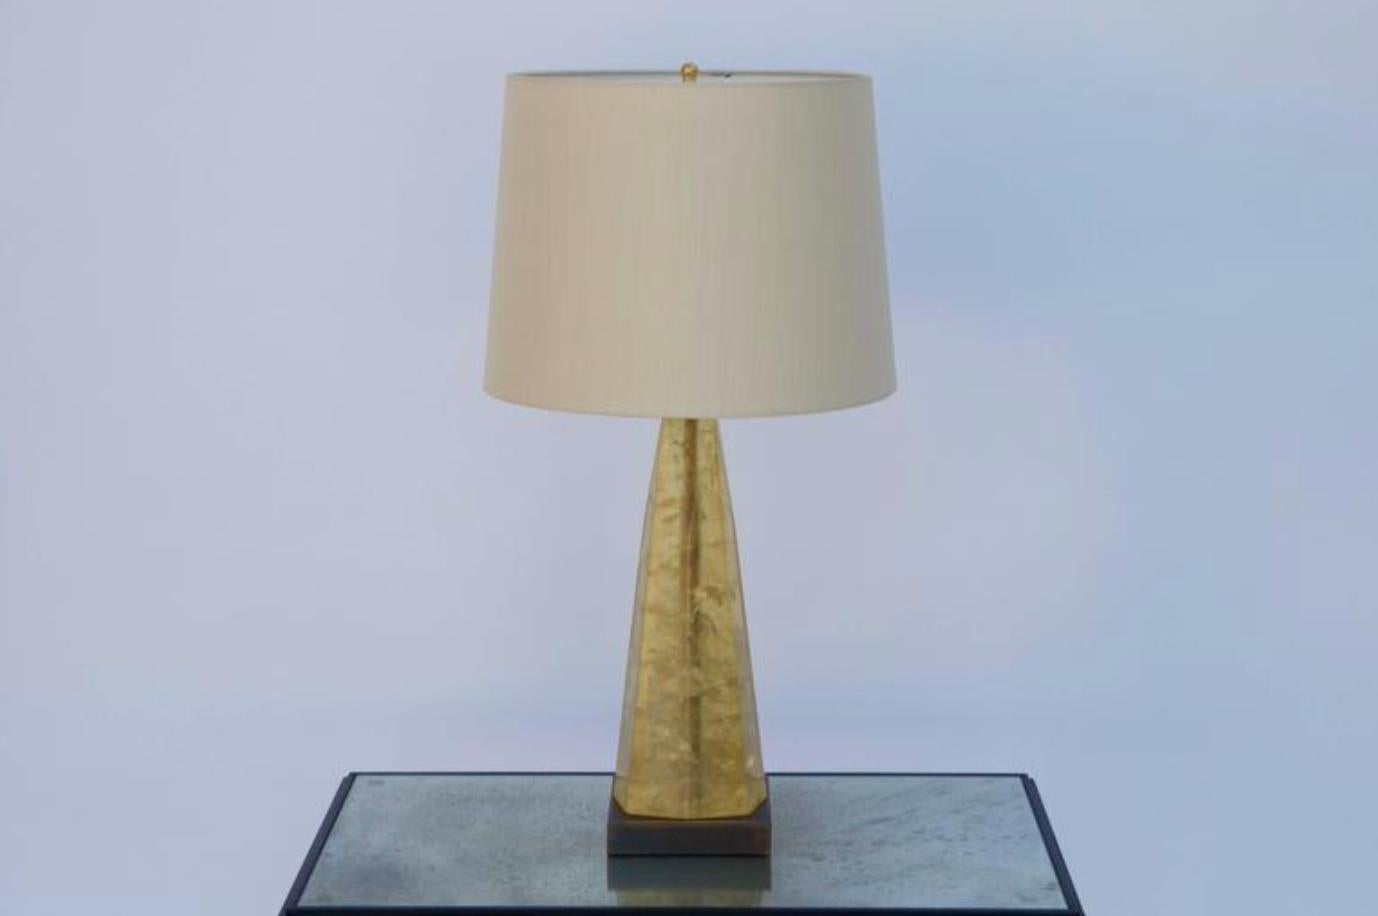 Fractal resin lamp in the style of Marie-Claude de Fouquières, circa 1975. Obelisk shaped fractal resin column over a patinated brass base. Rewired with custom cream silk shade and matching top diffuser. Very chic lamp.

Shade measurement : 14'